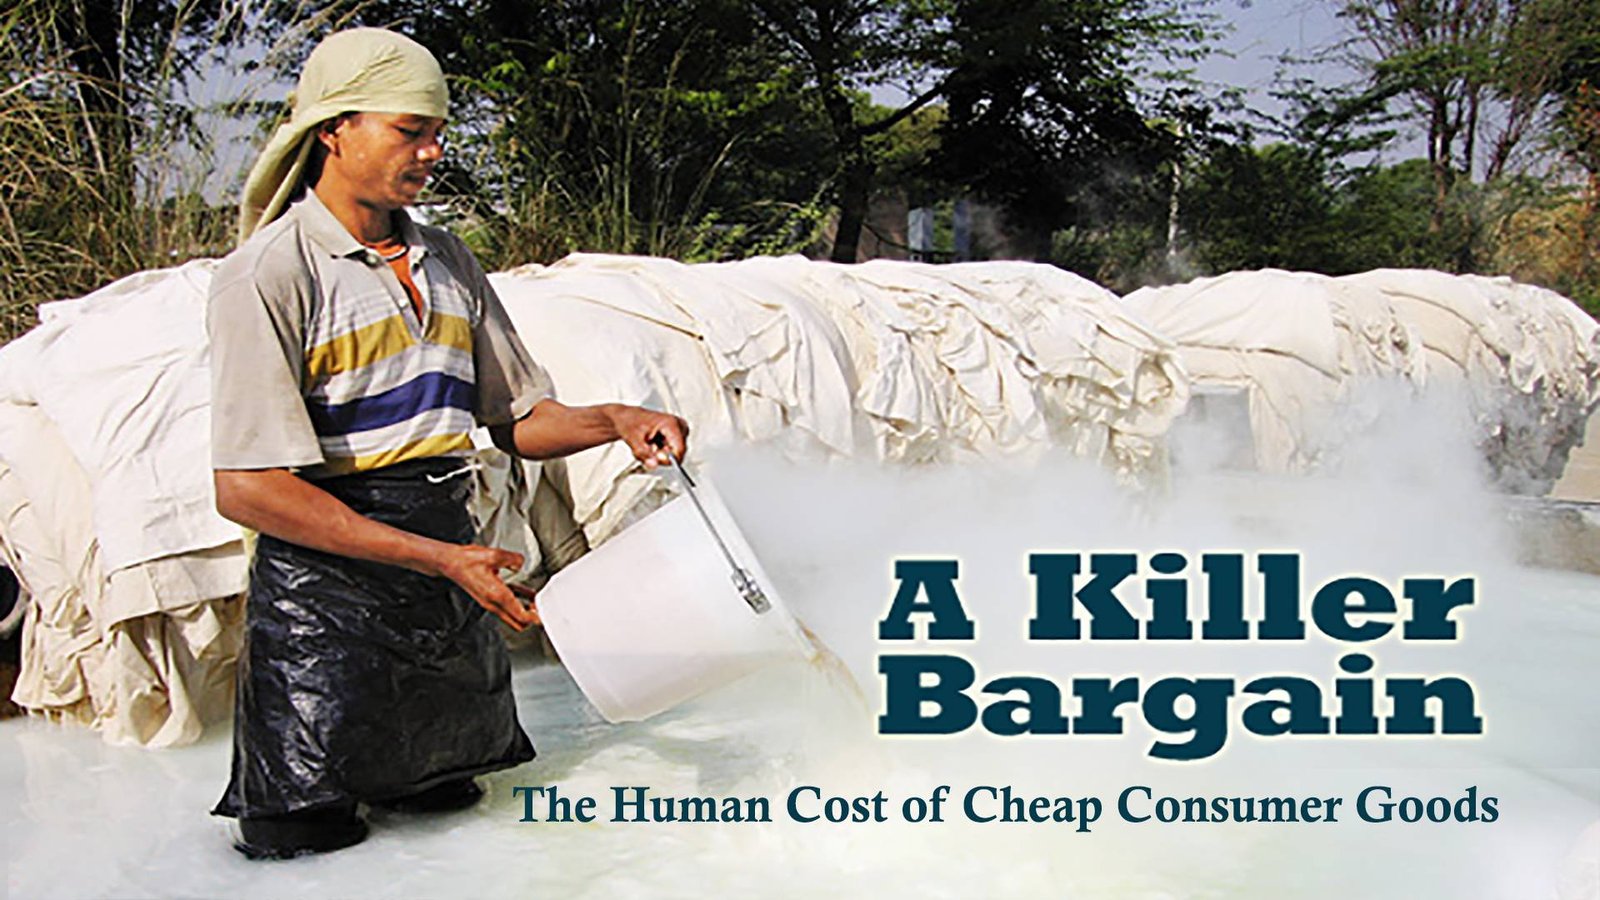 A Killer Bargain - The Human Cost of Cheap Consumer Goods